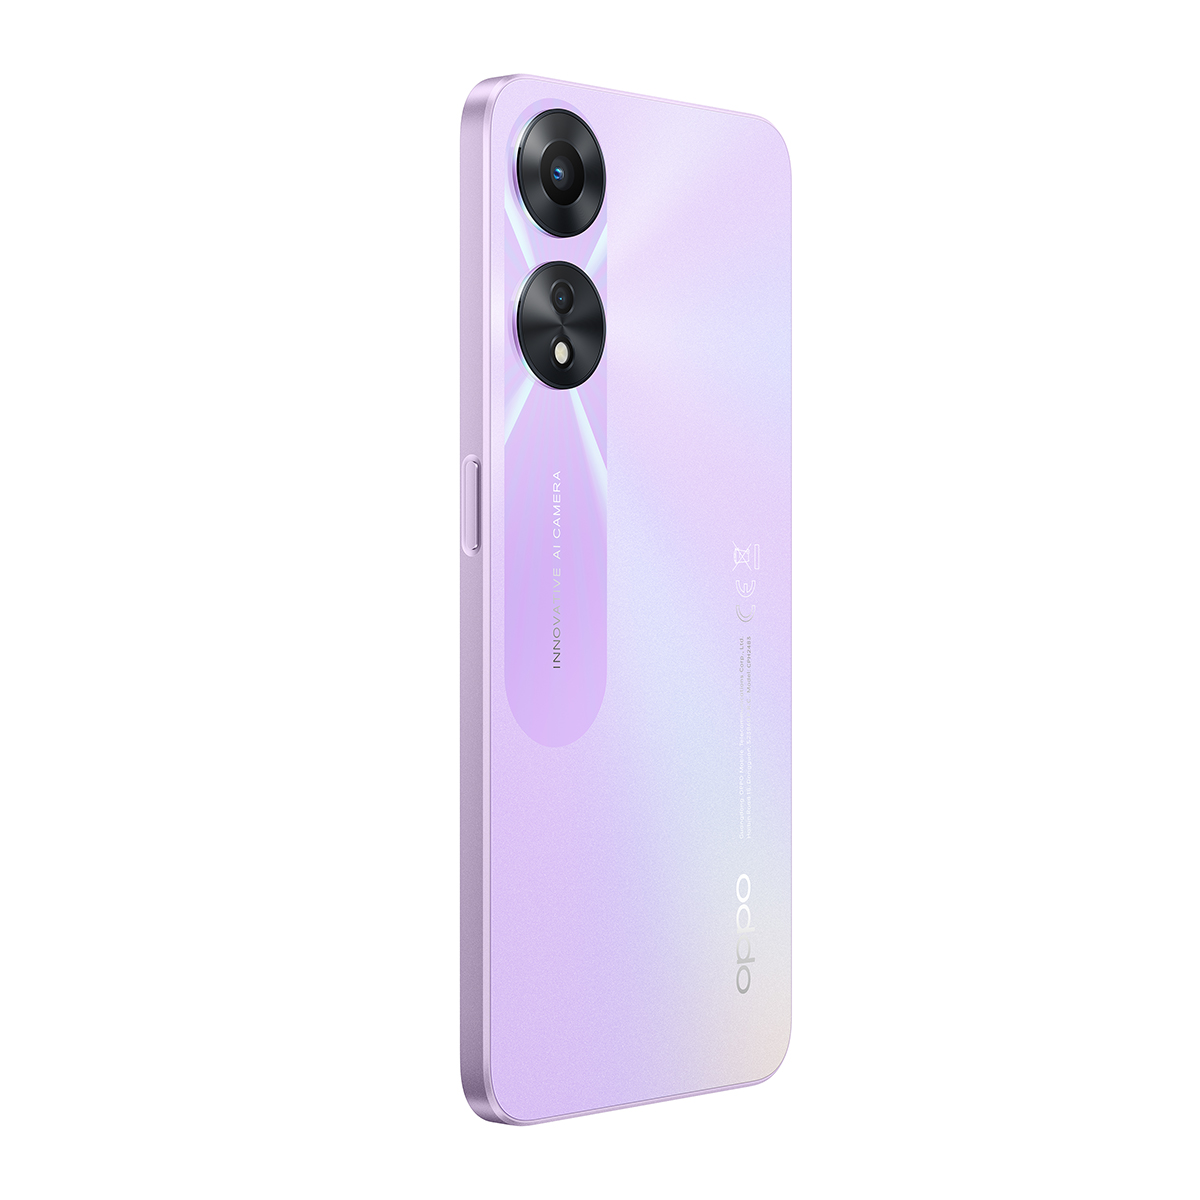 OPPO A78 5G, , large image number 3